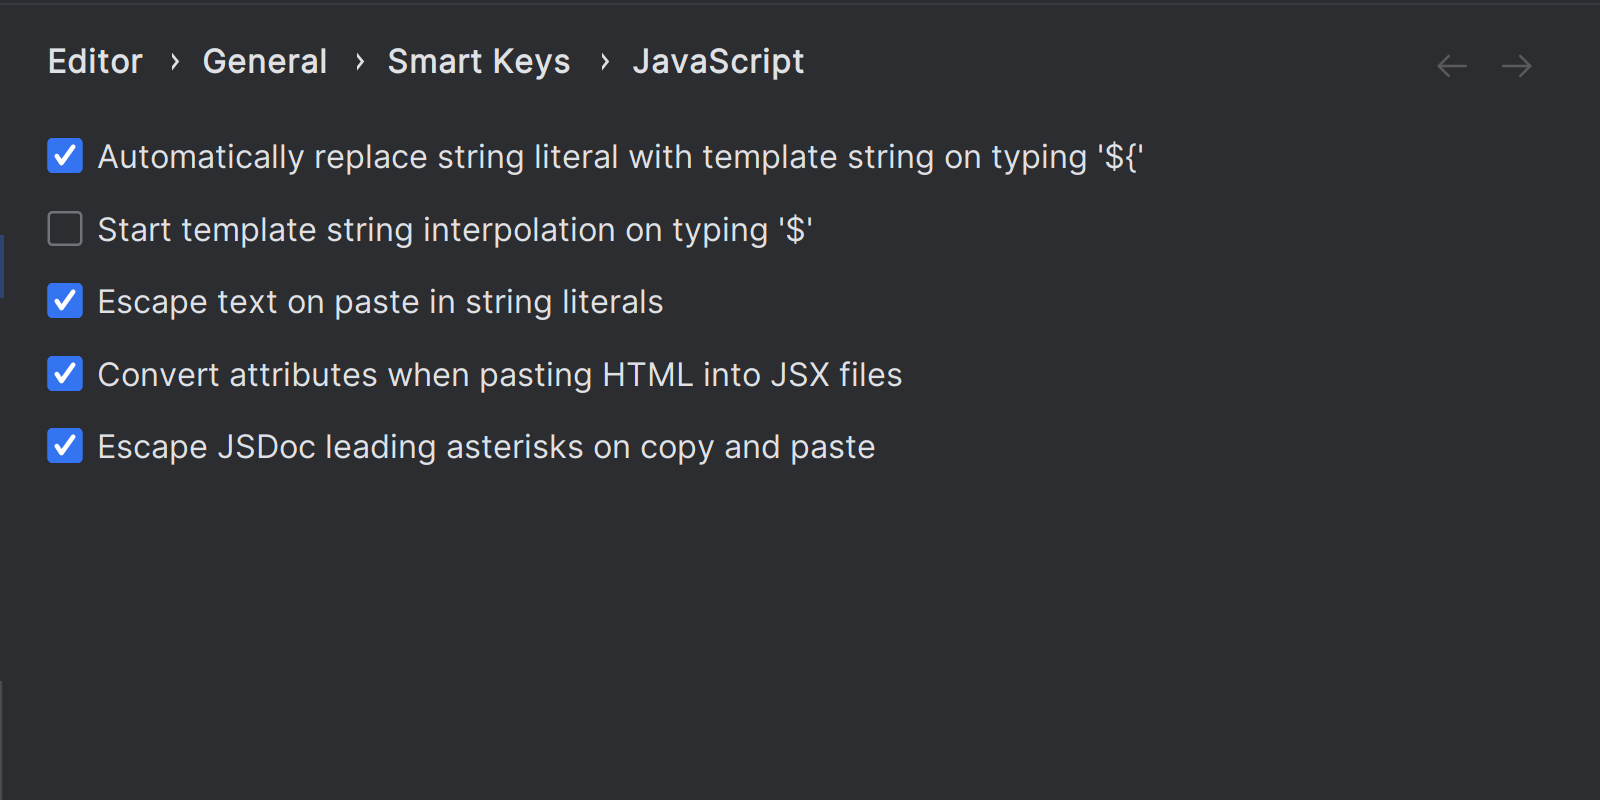 Showing the settings options under smart keys JavaScript that includes the option to automatically replace string literal with template string on typing